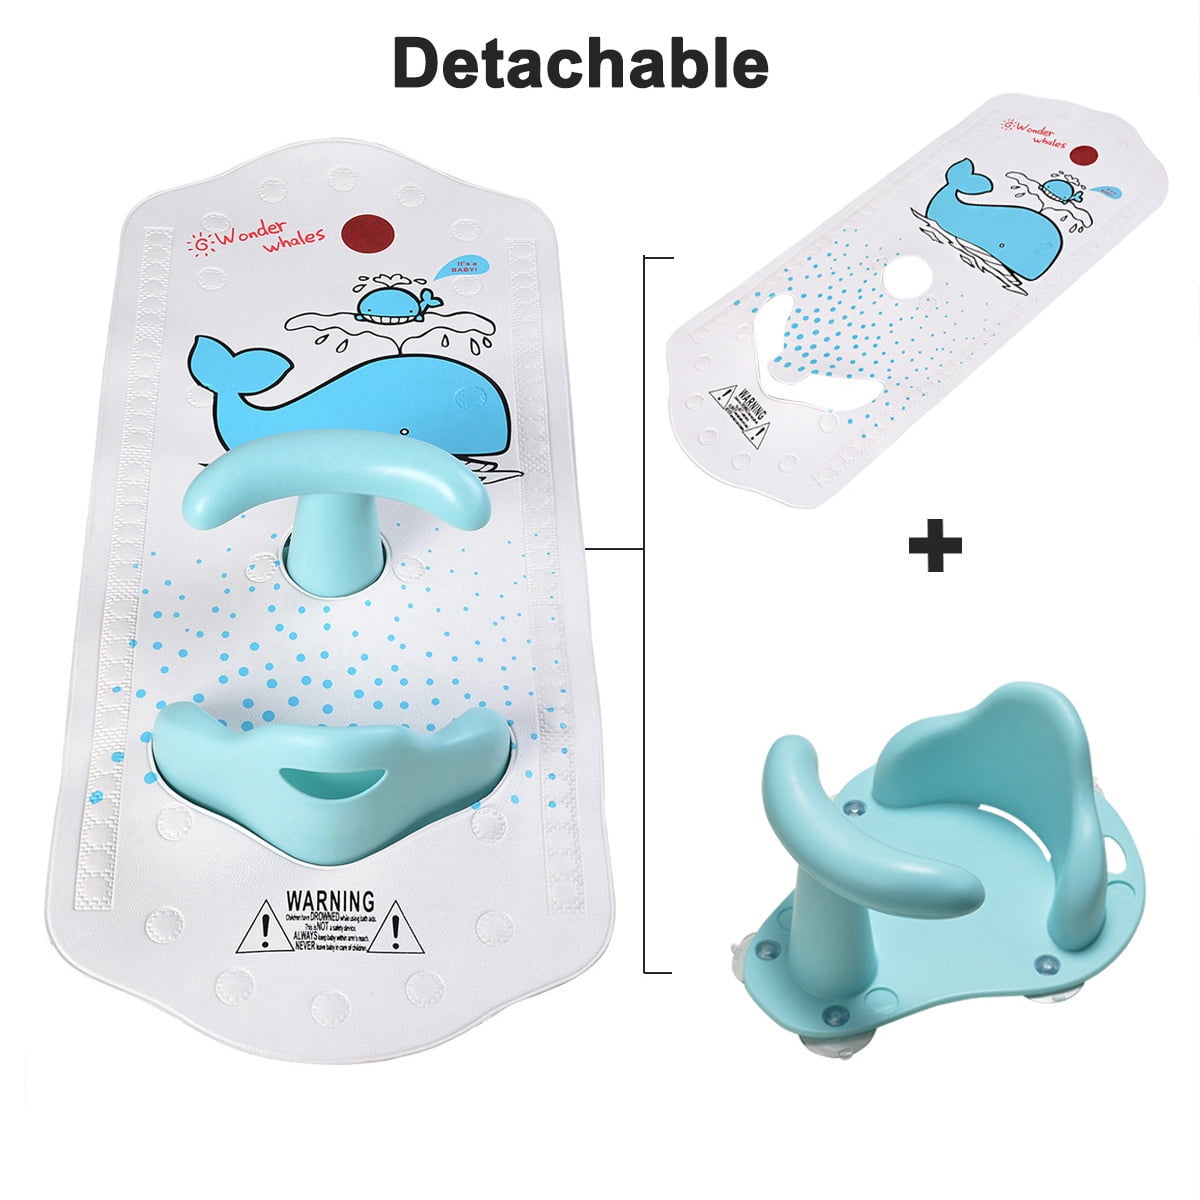 Turquoise 3 in 1 Baby Toddler Child Bath Support Seat Safety Bathing Safe Dinning Play BPA Free